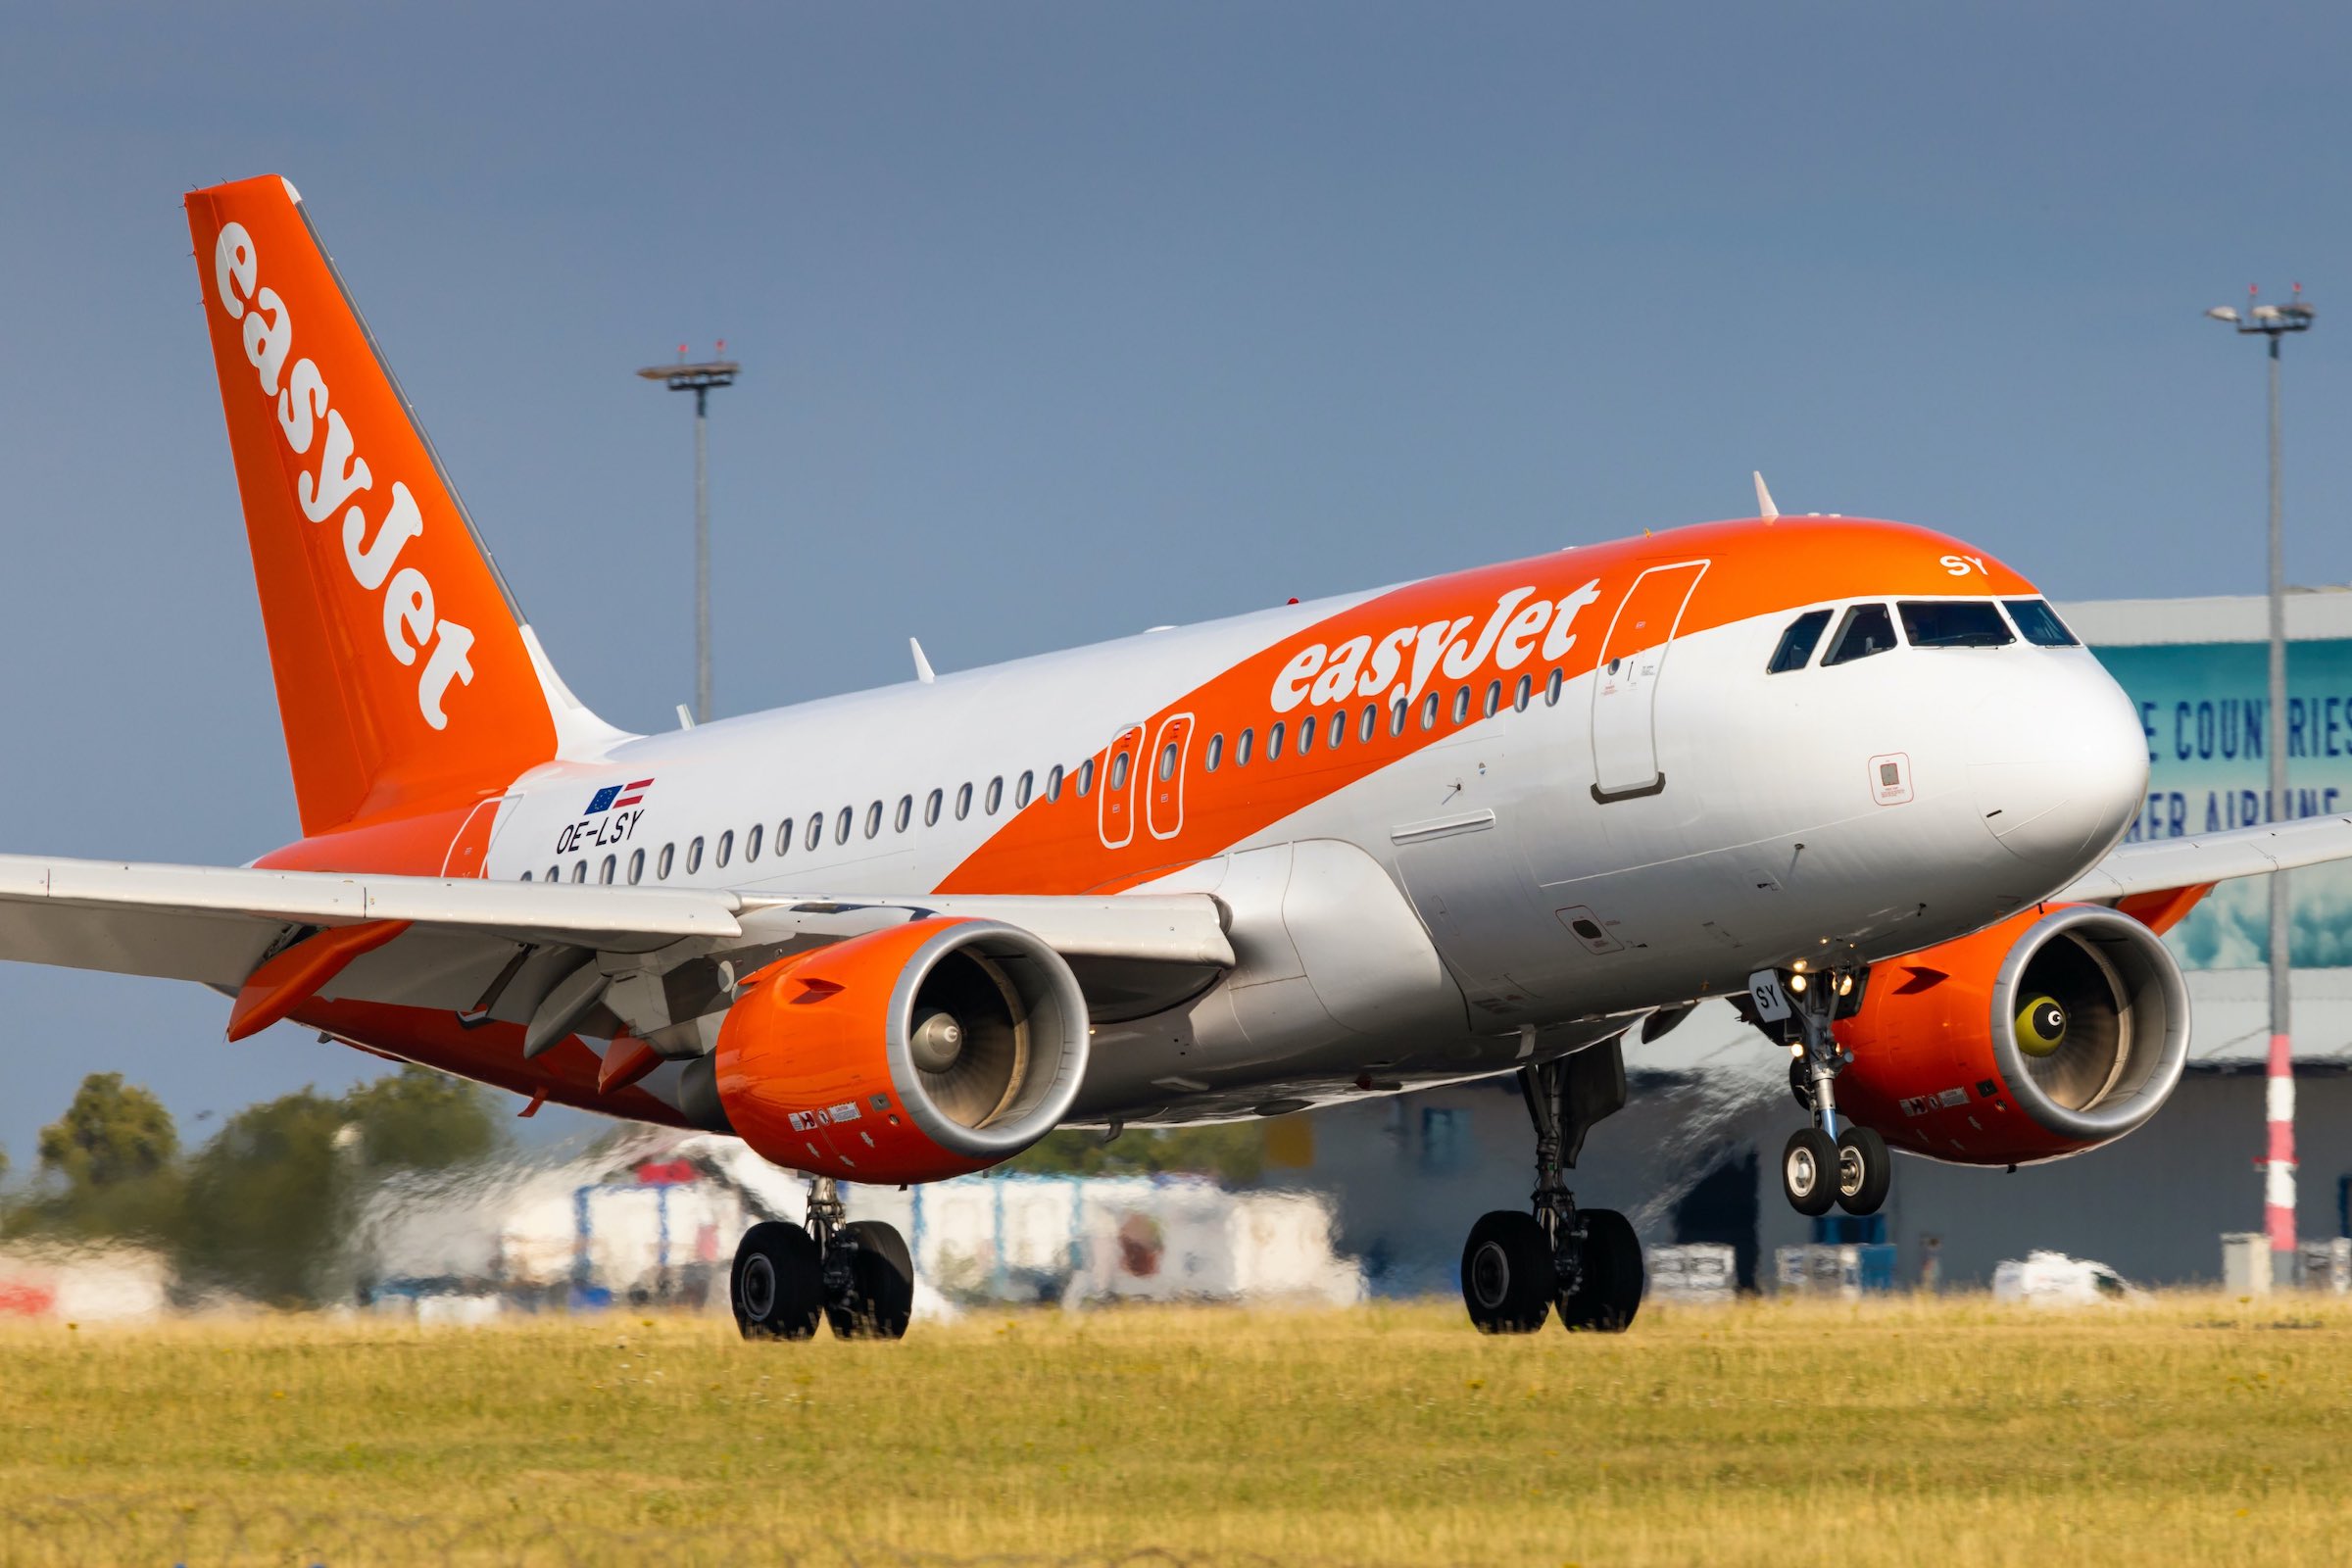 Easyjet Holidays is now taking bookings for summer 2022